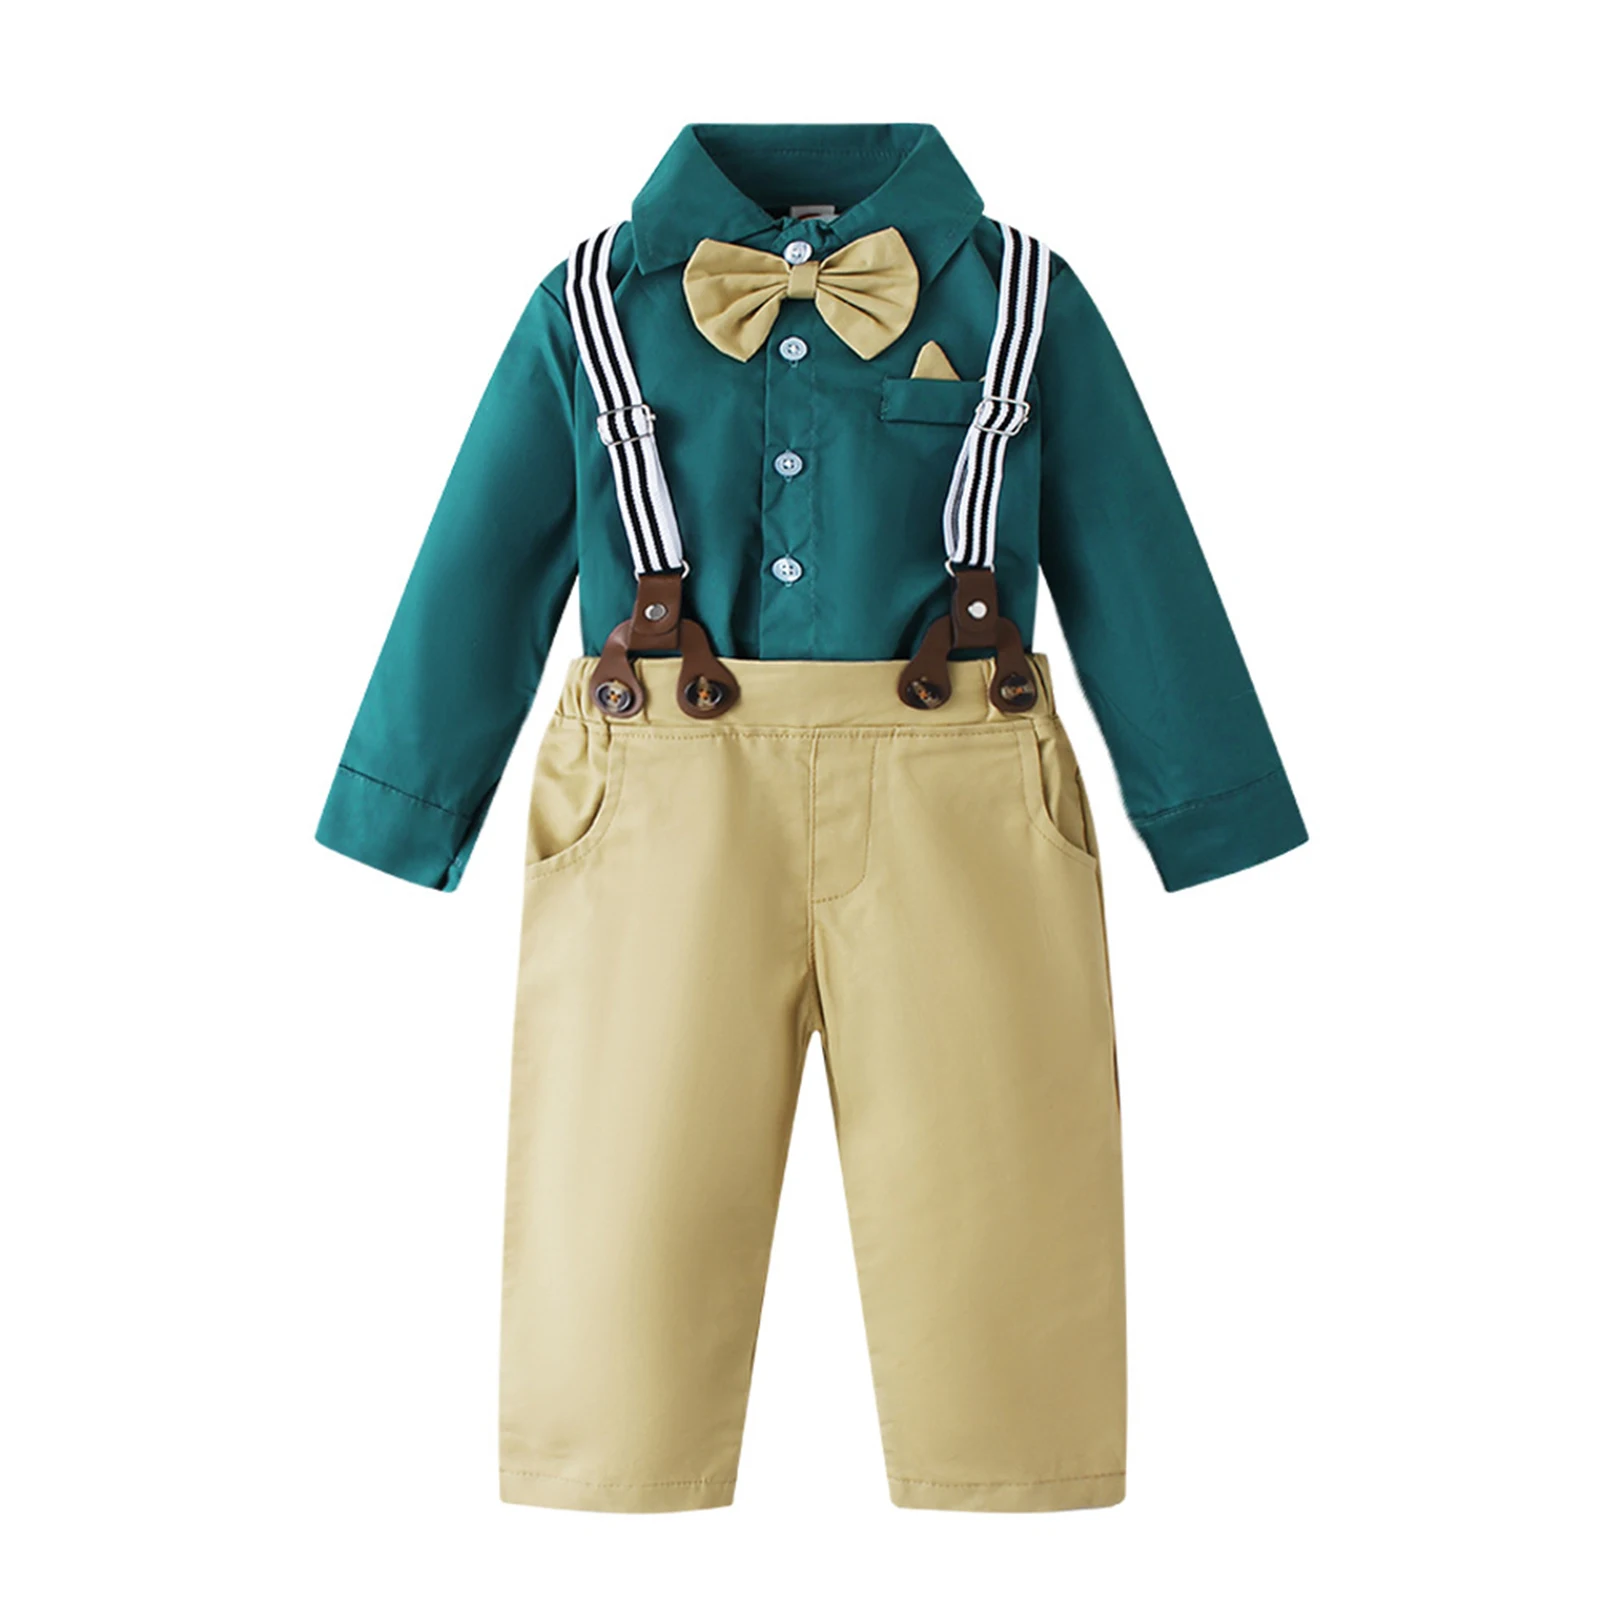 Kids Boys Gentleman Birthday Party Outfits Long Sleeve Clothes Sets for Formal Occassion Wedding Babys Christening Formal Suit